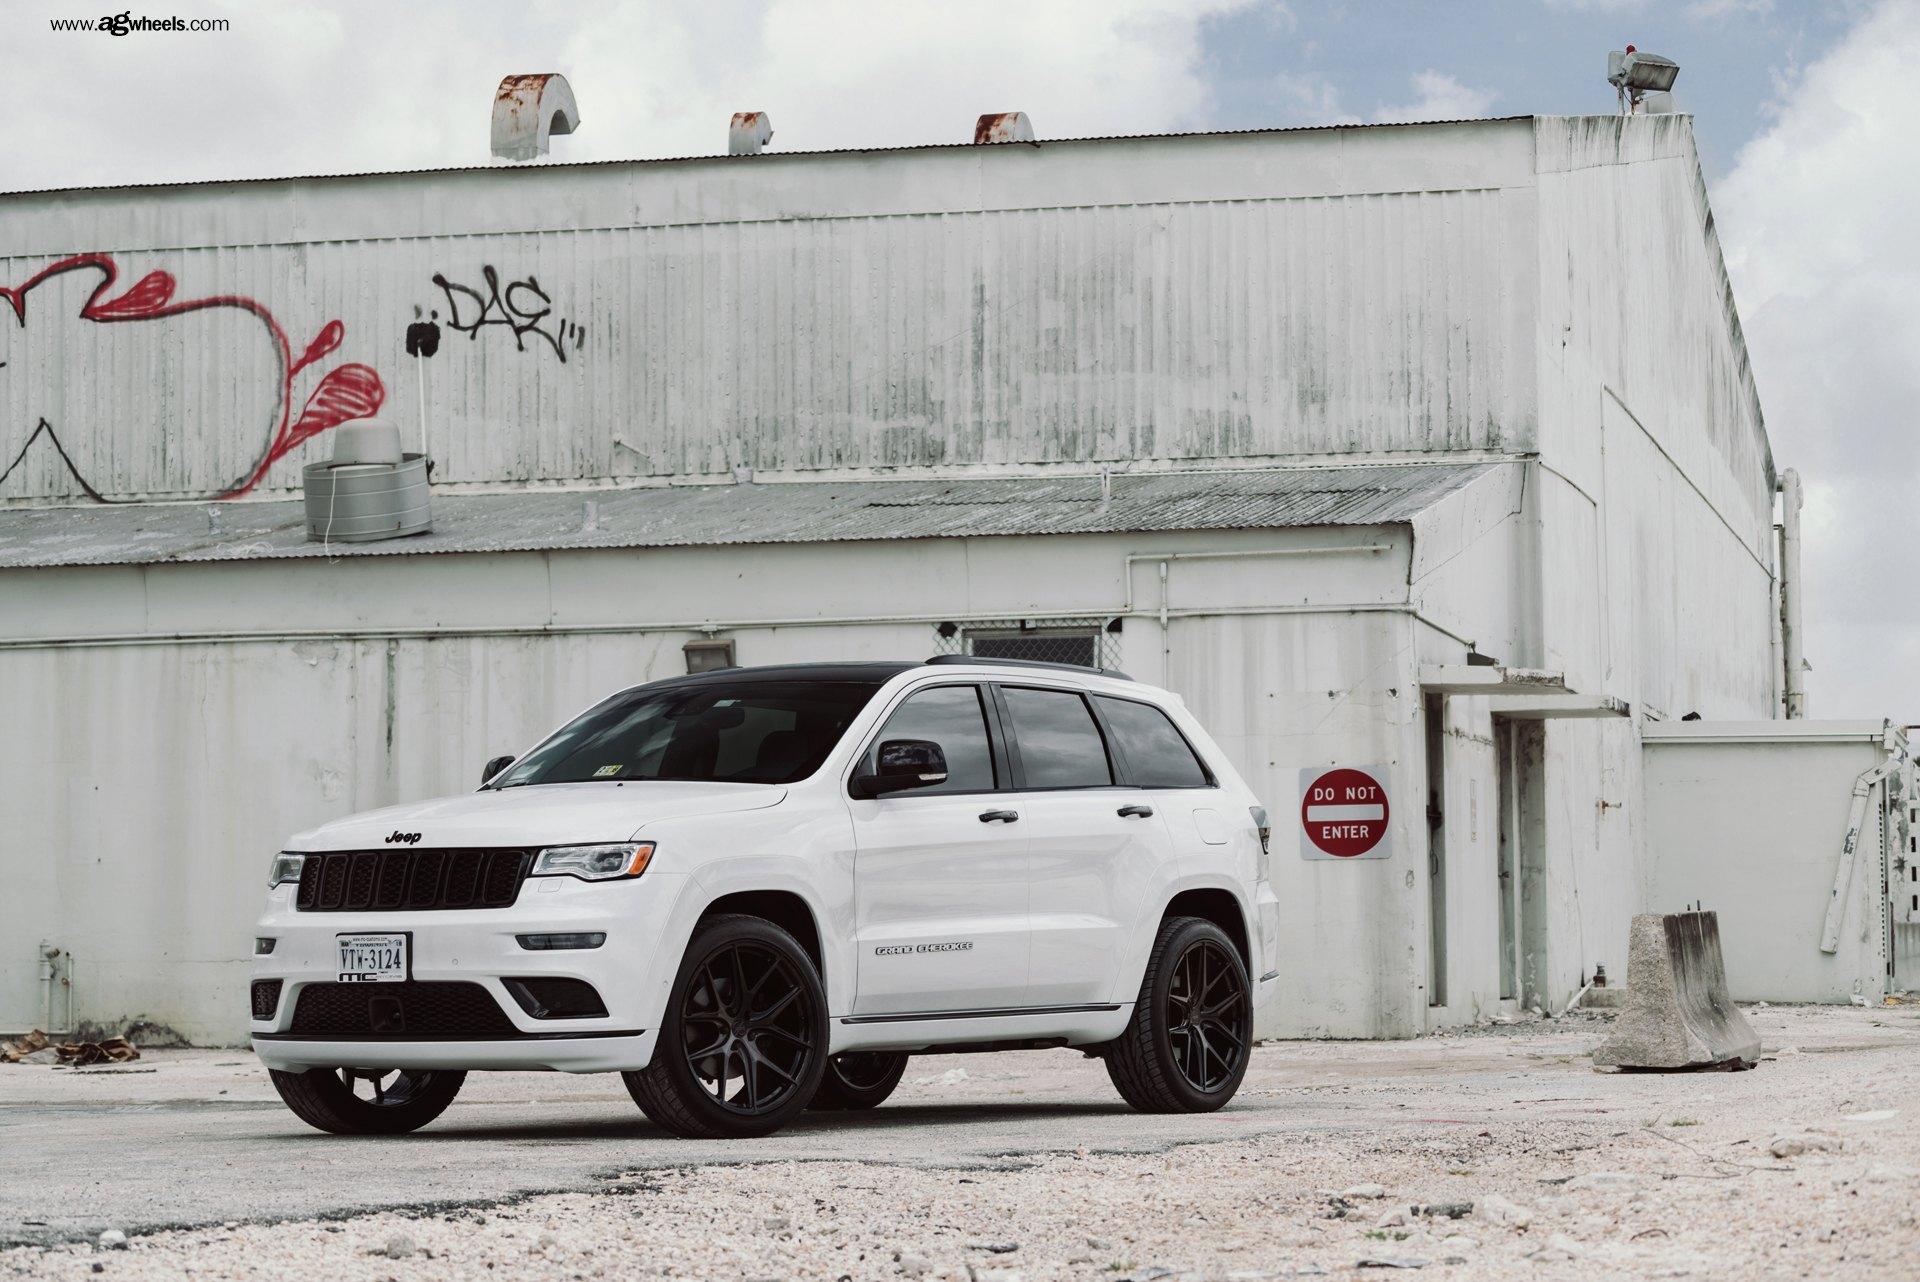 Blacked Out Grille on White Jeep Grand Cherokee - Photo by Avant Garde Wheels